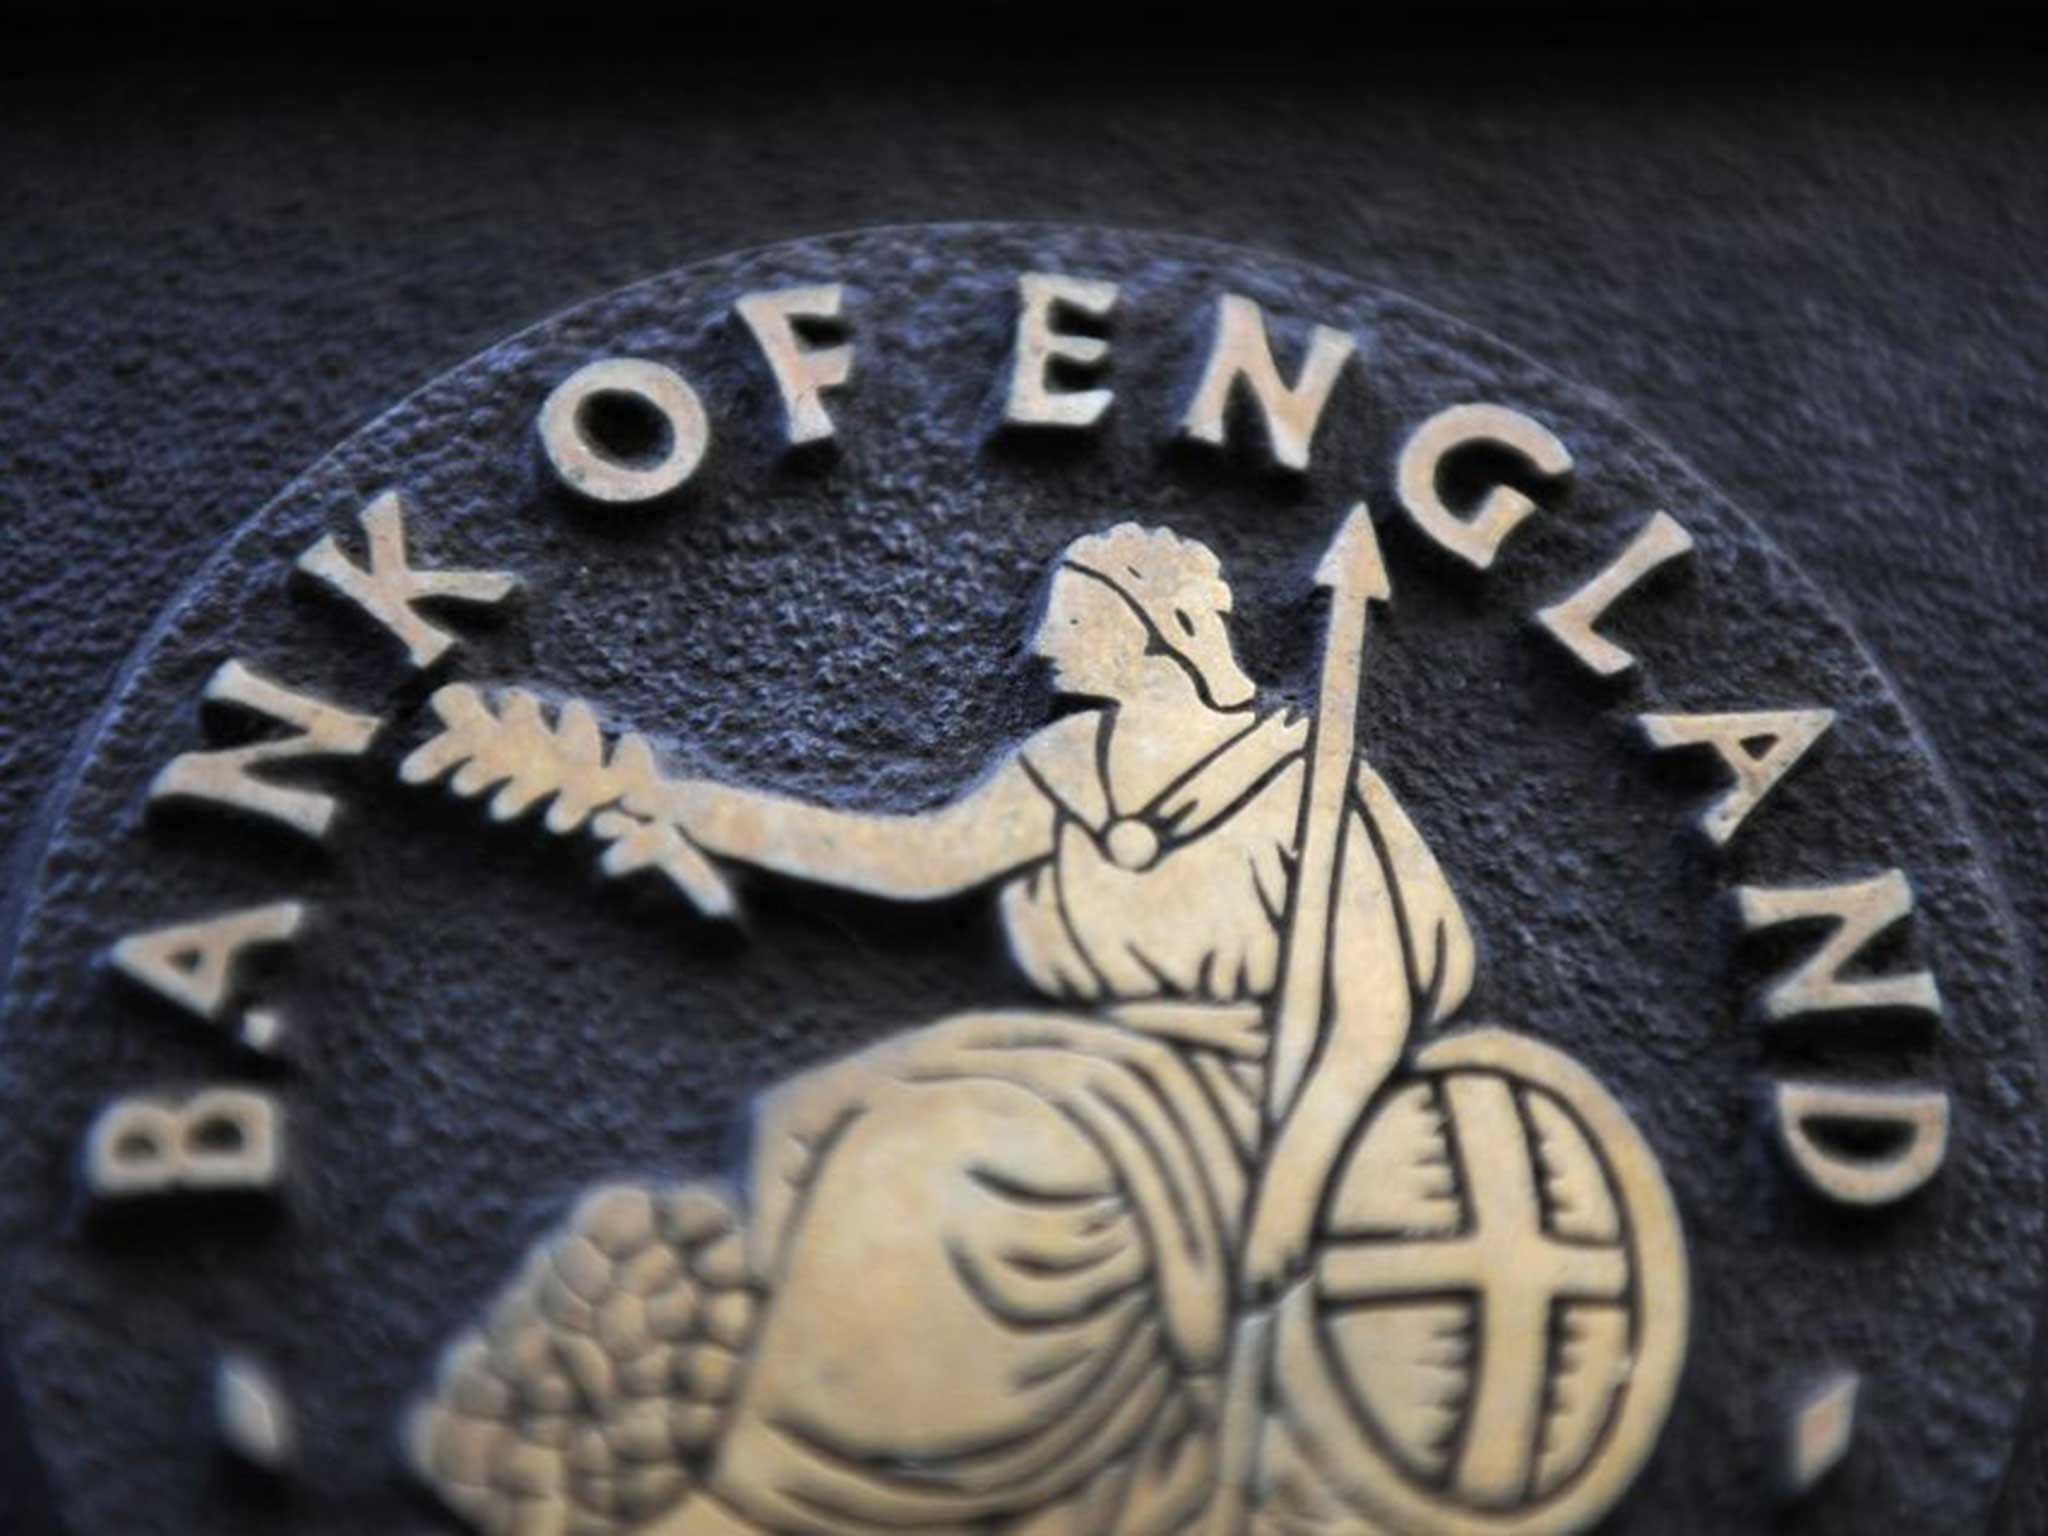 The Bank of England’s mandate currently compels the Monetary Policy Committee to keep consumer prices, as measured by CPI, rising at an annual rate of around 2 per cent over its forecast horizon